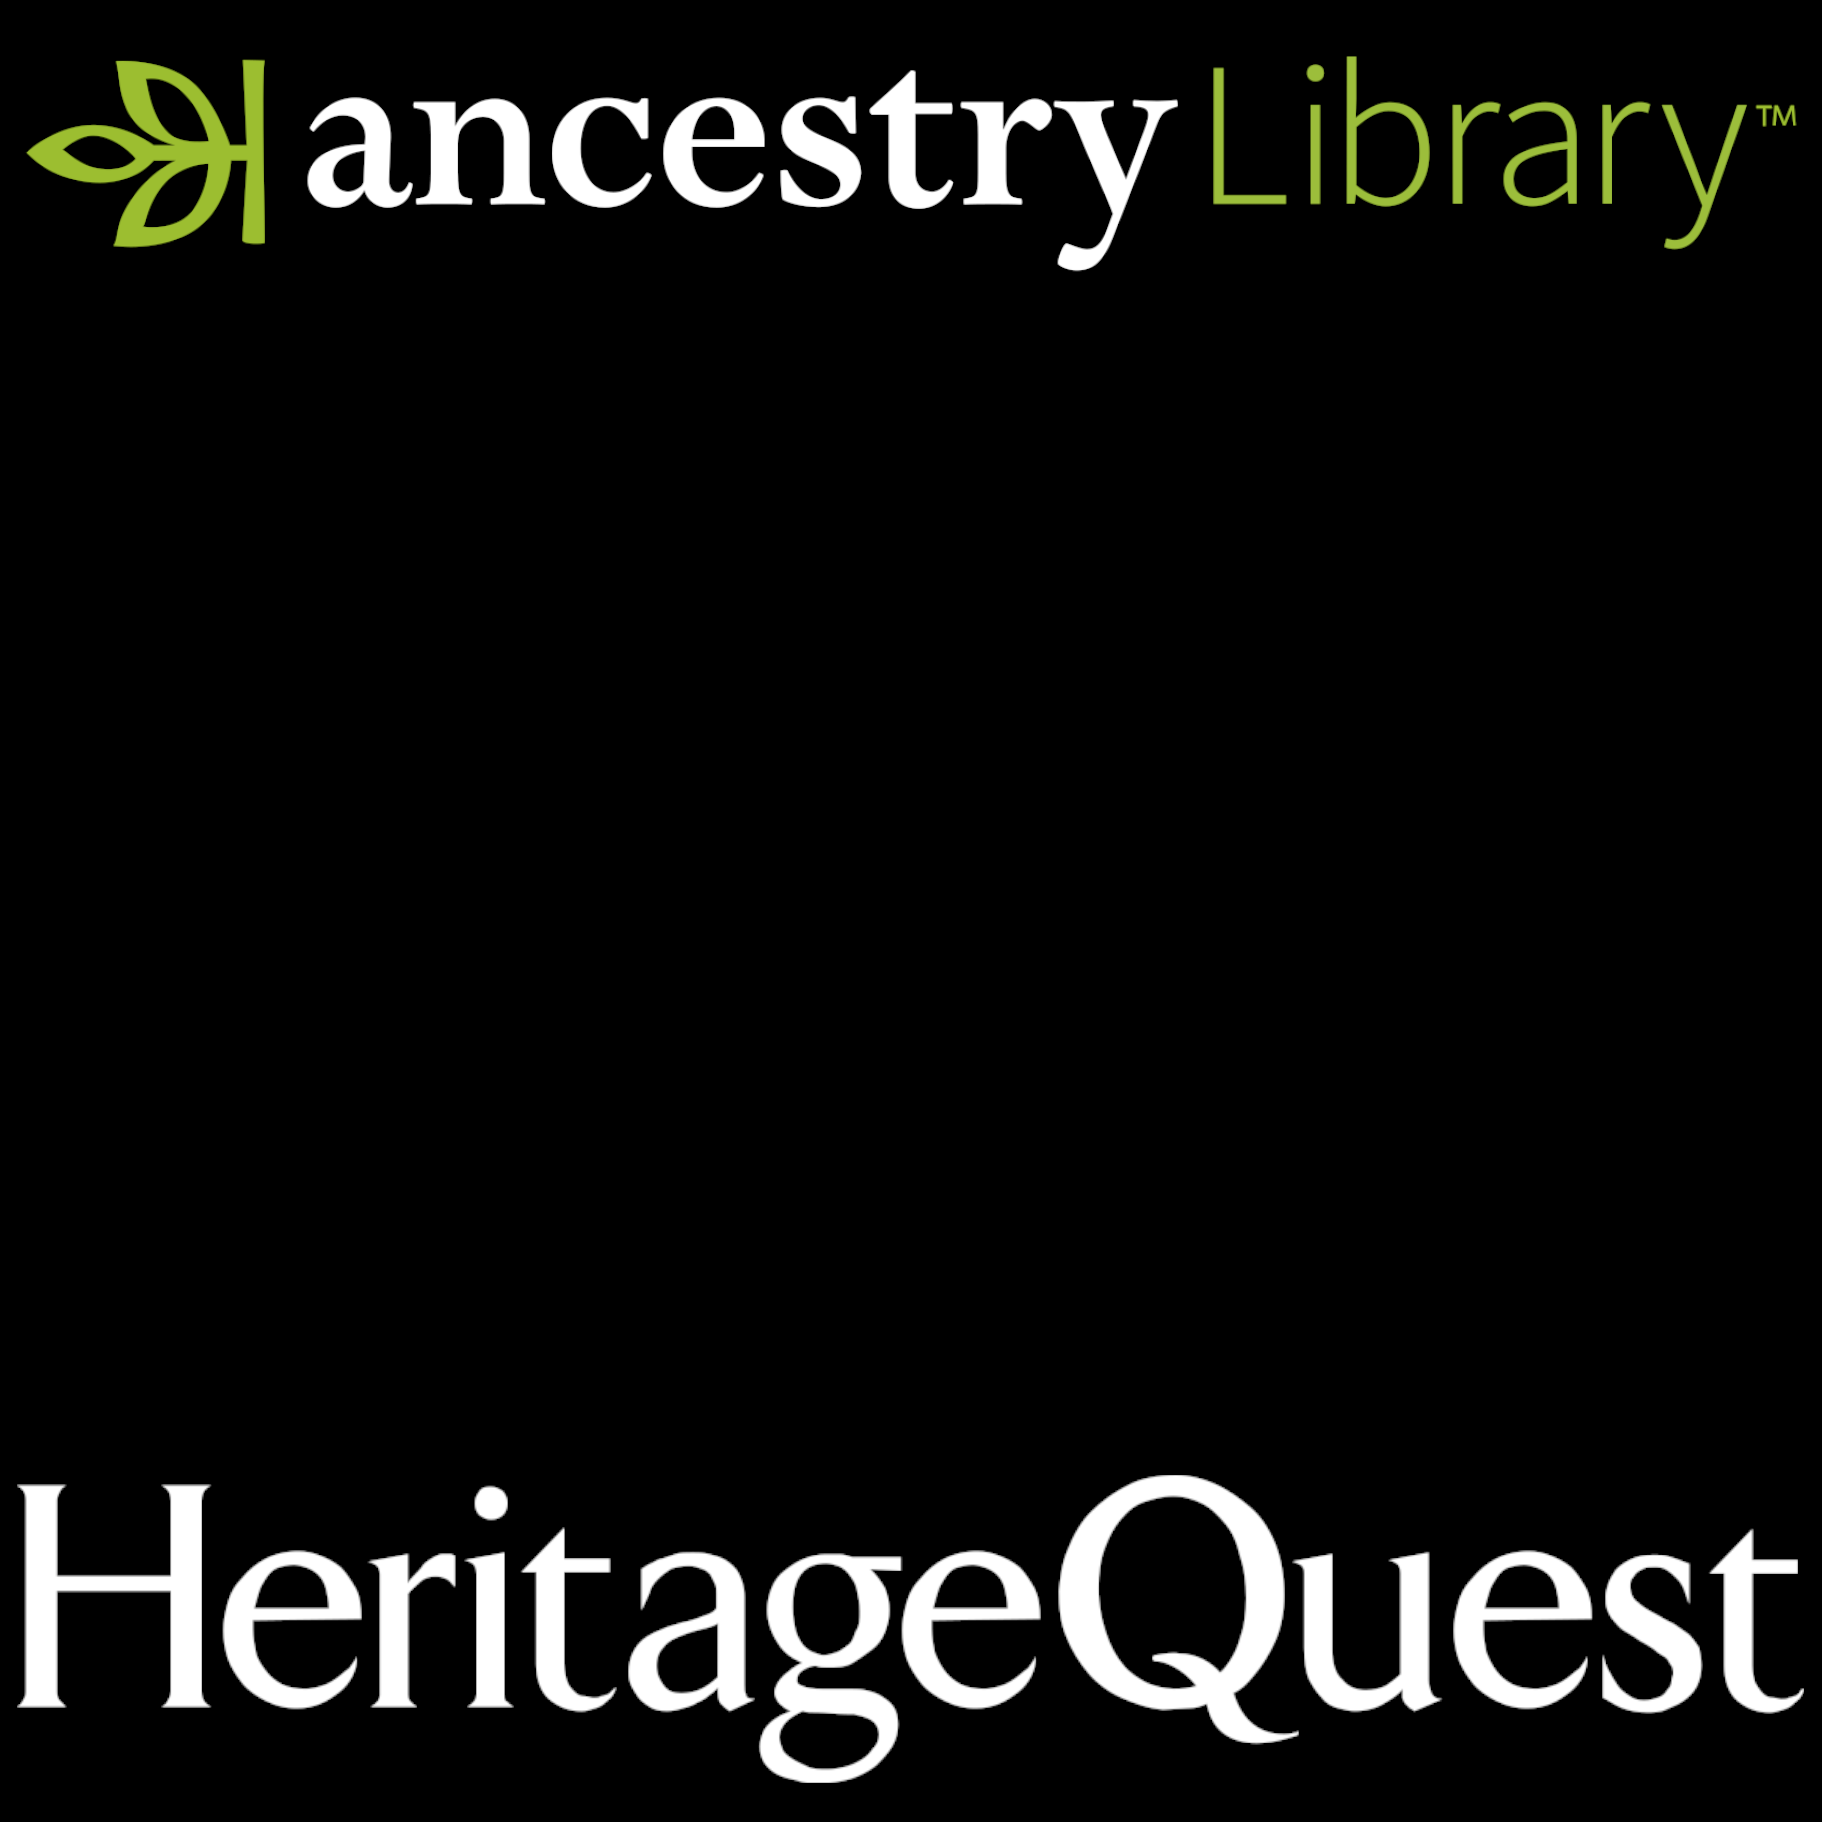 Advertisement for Ancestry.com for Libraries